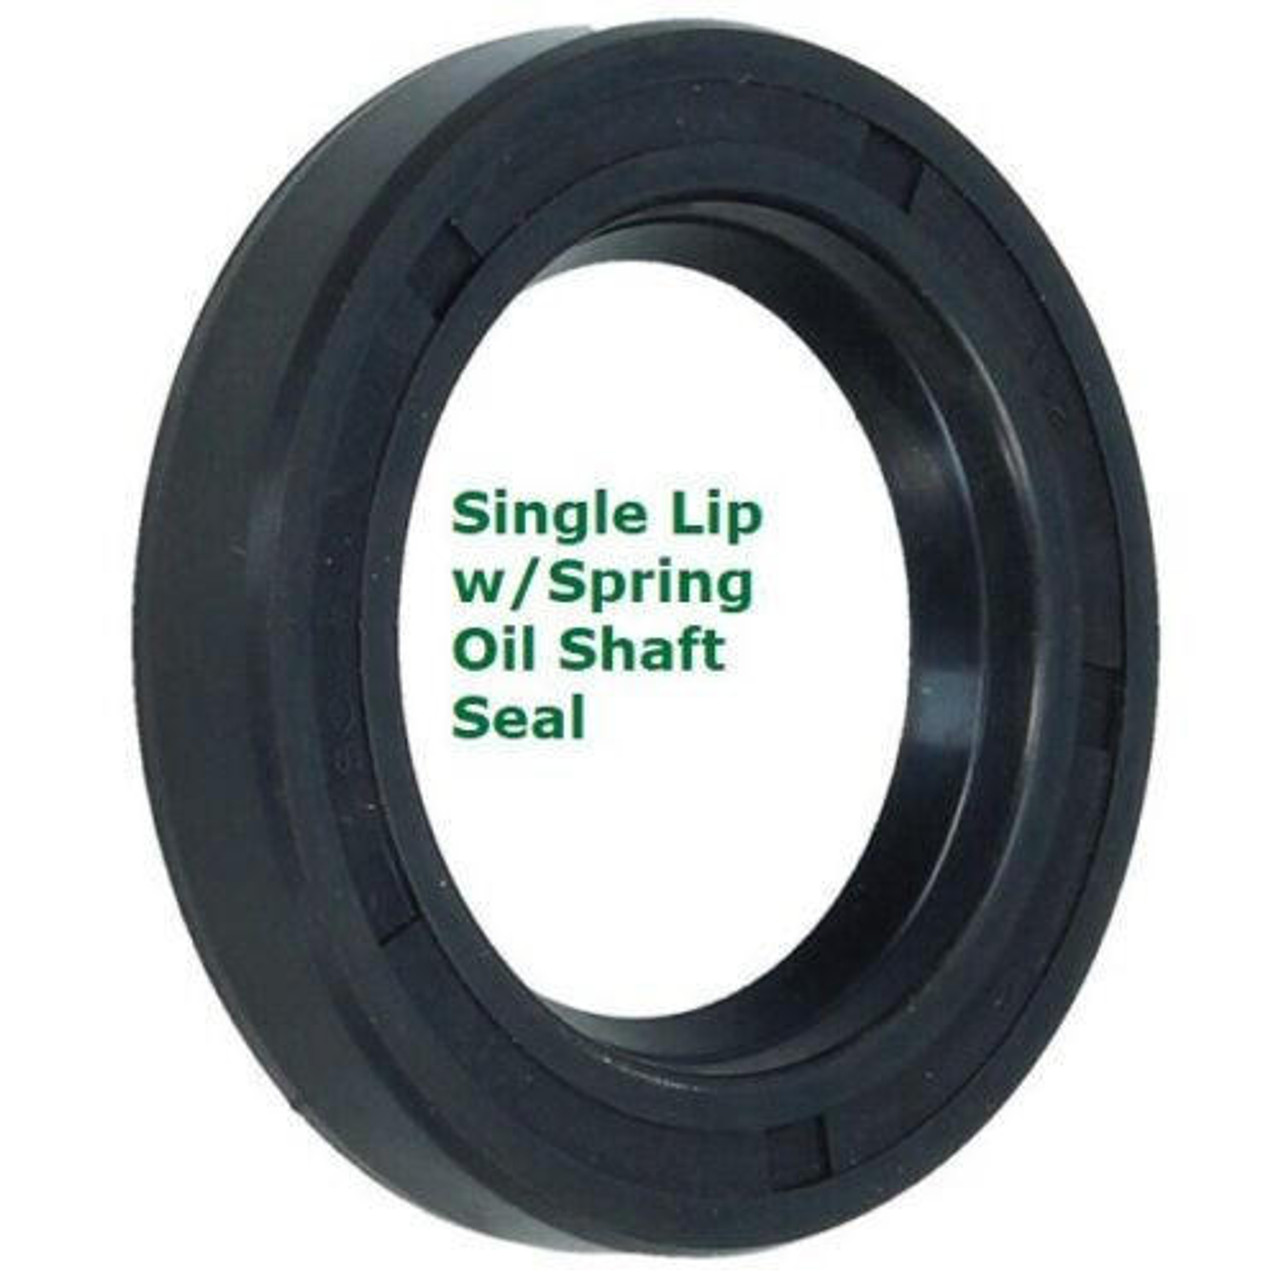 Copy of Metric Oil Shaft Seal 35 x 62 x 8mm Single Lip   Price for 1 pc